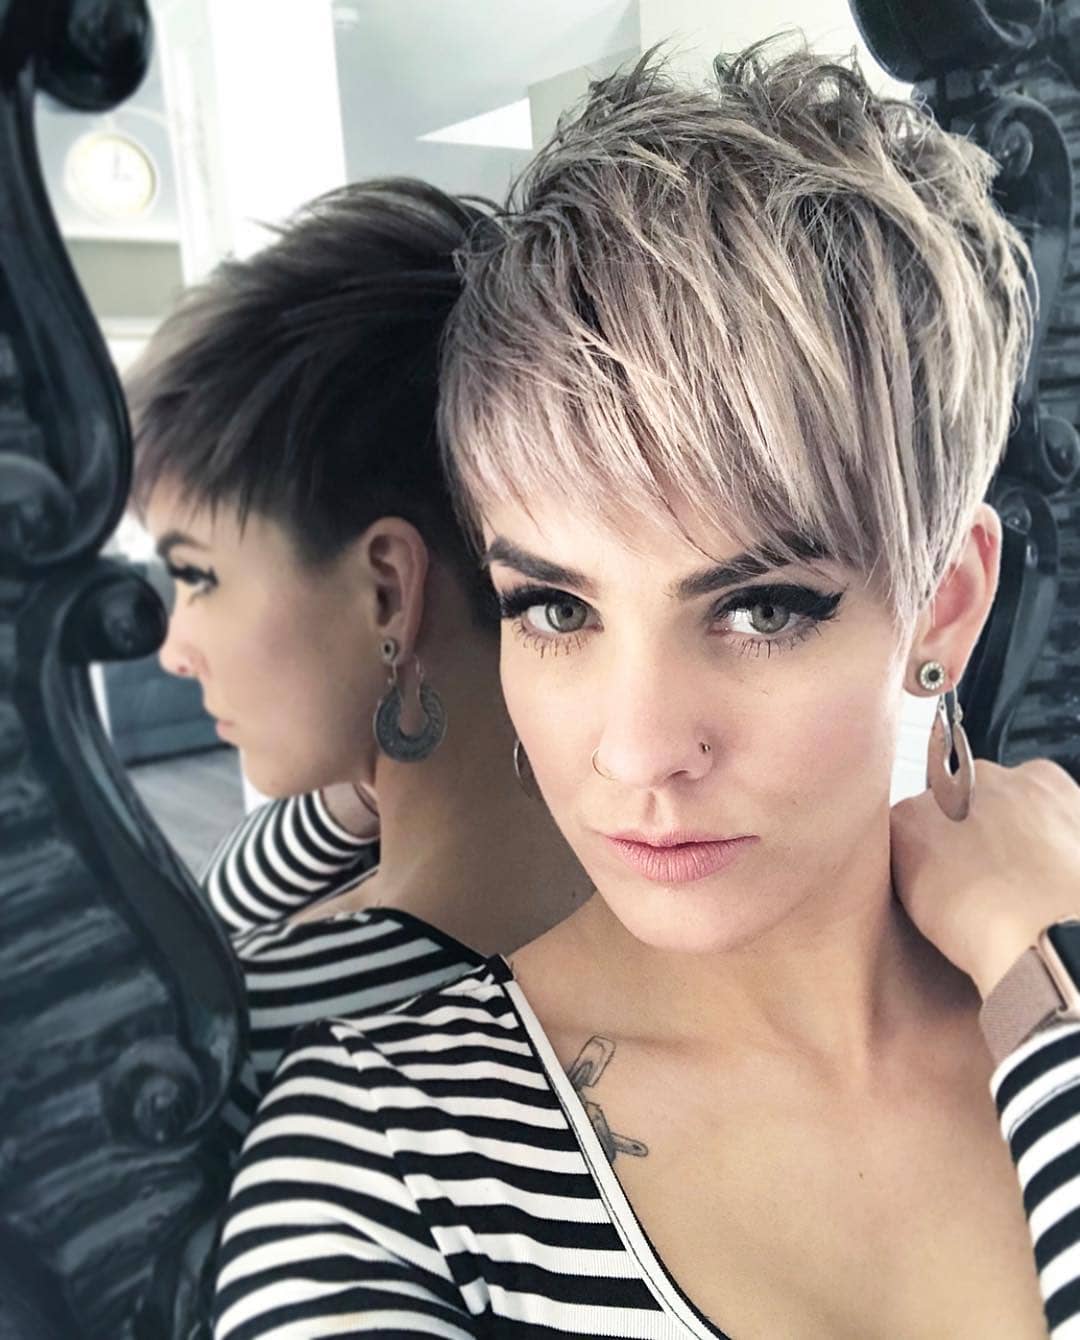 Top 10 Most Flattering Pixie Haircuts for Women, Short Hair Styles 2021